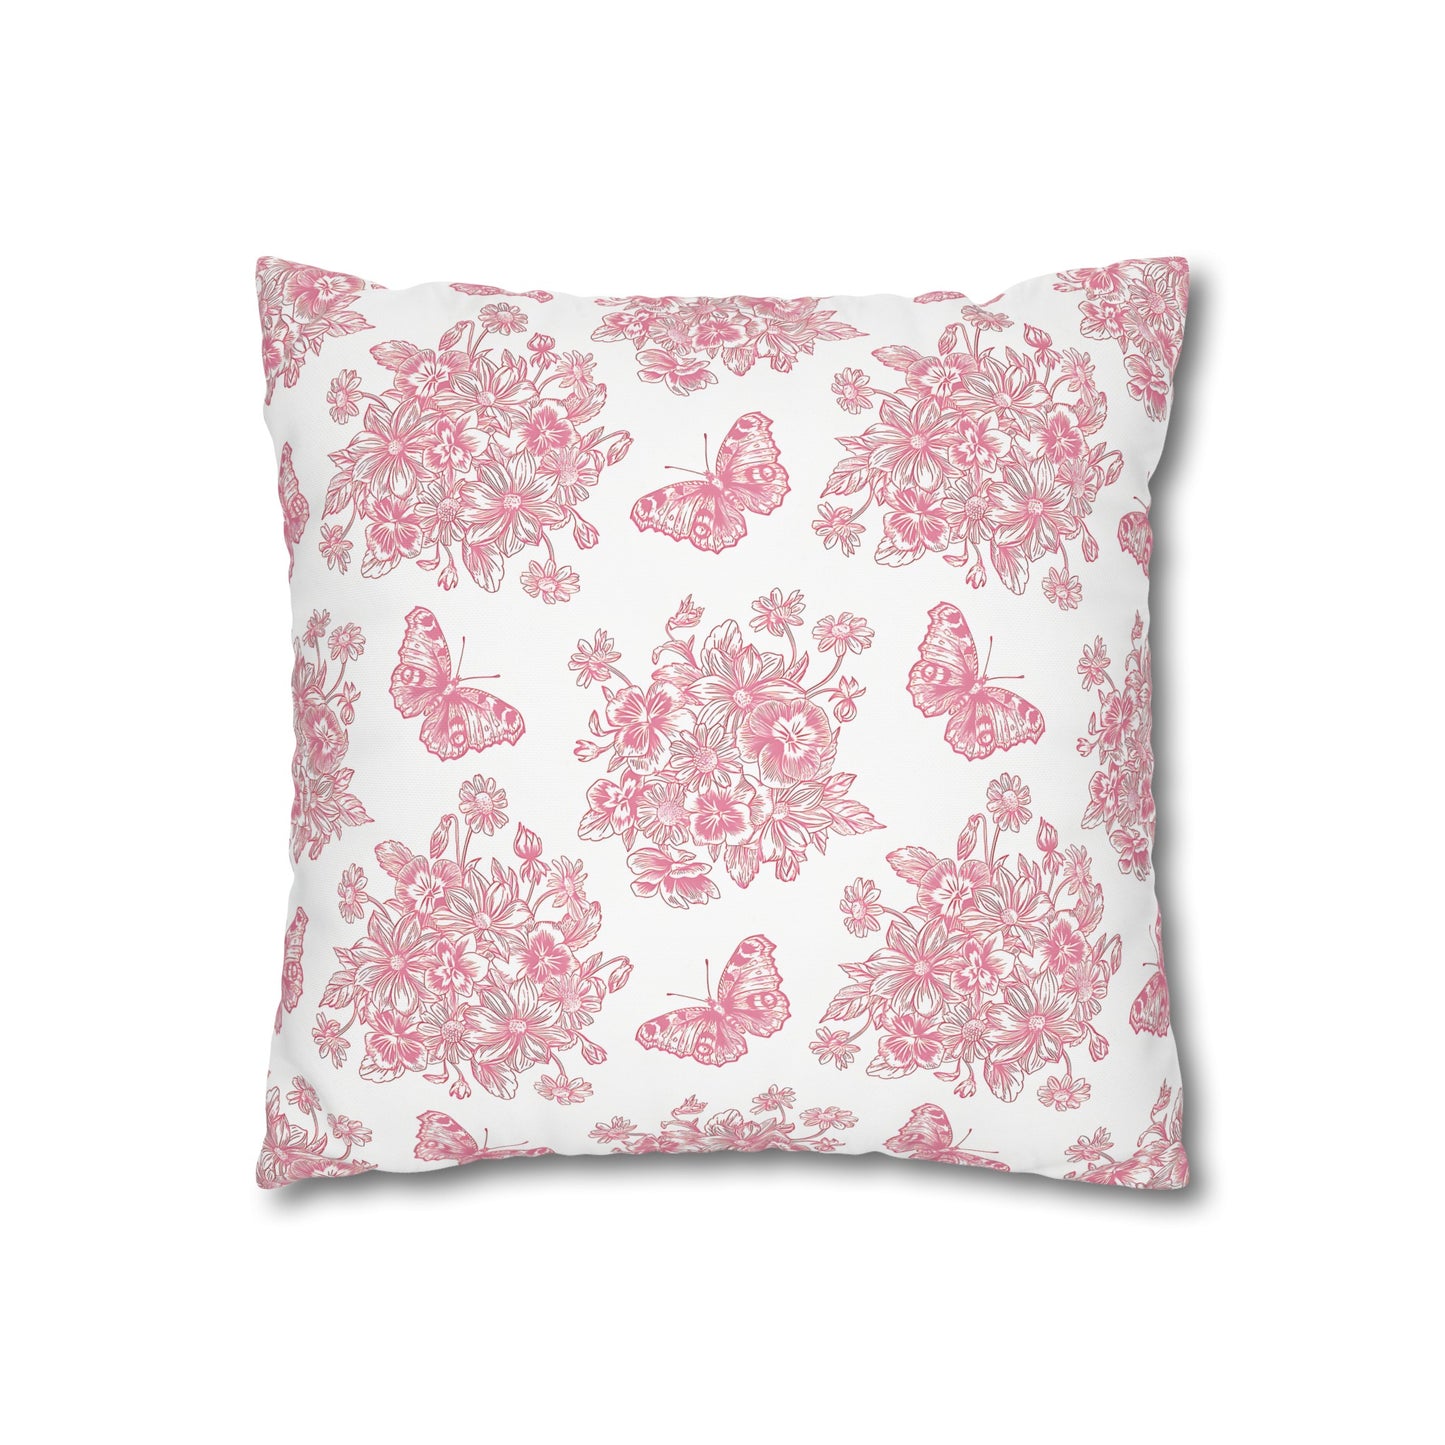 Pink & White Butterfly #1 Cushion Cover